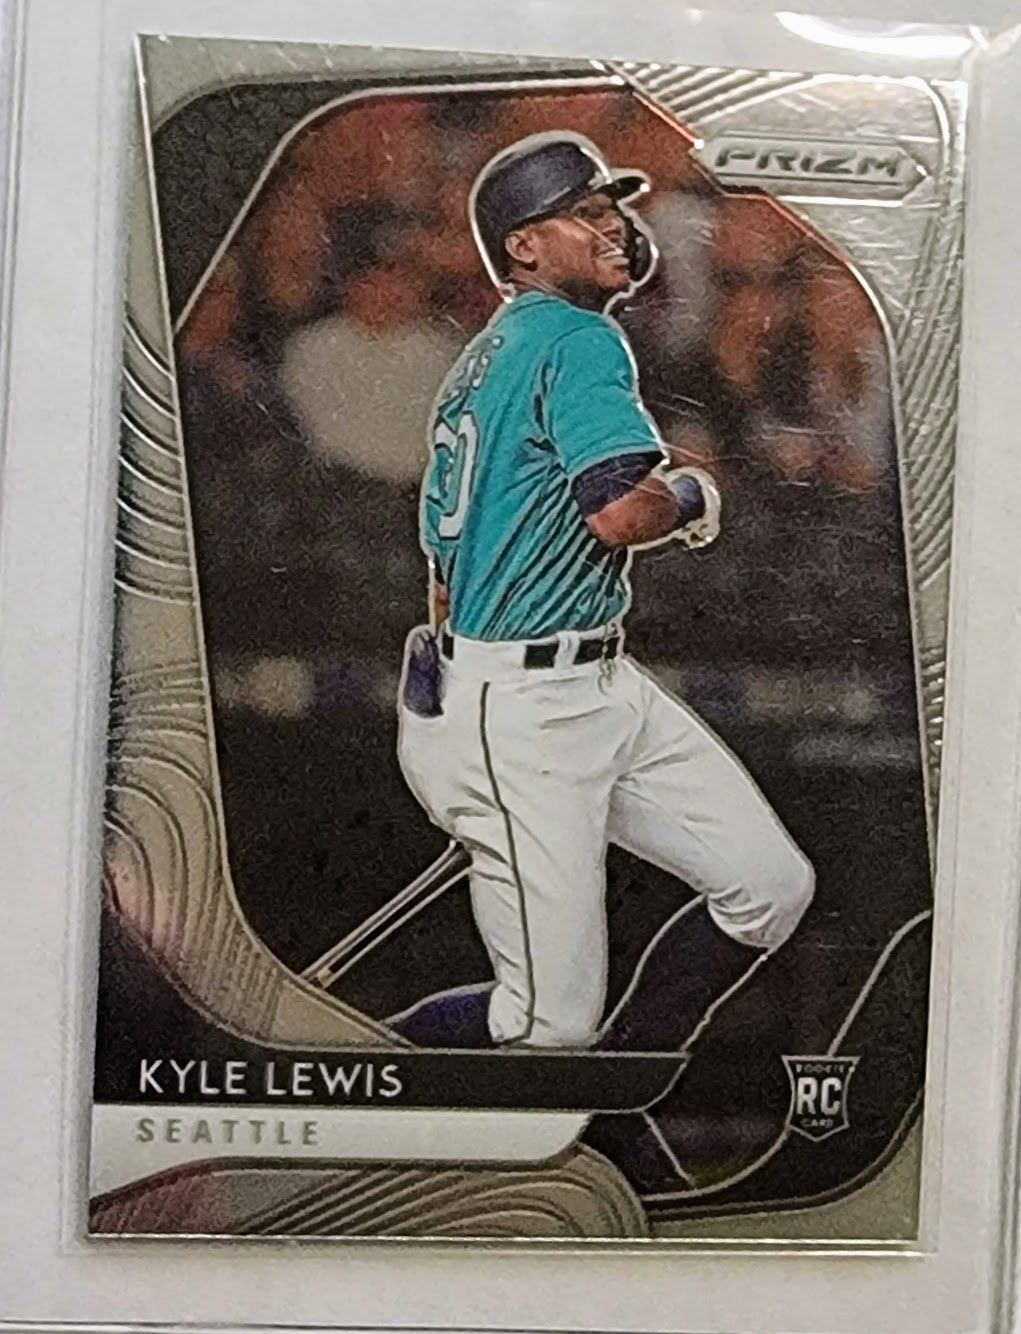 2020 Panini Prizm Kyle Lewis Rookie Baseball Card TPTV simple Xclusive Collectibles   